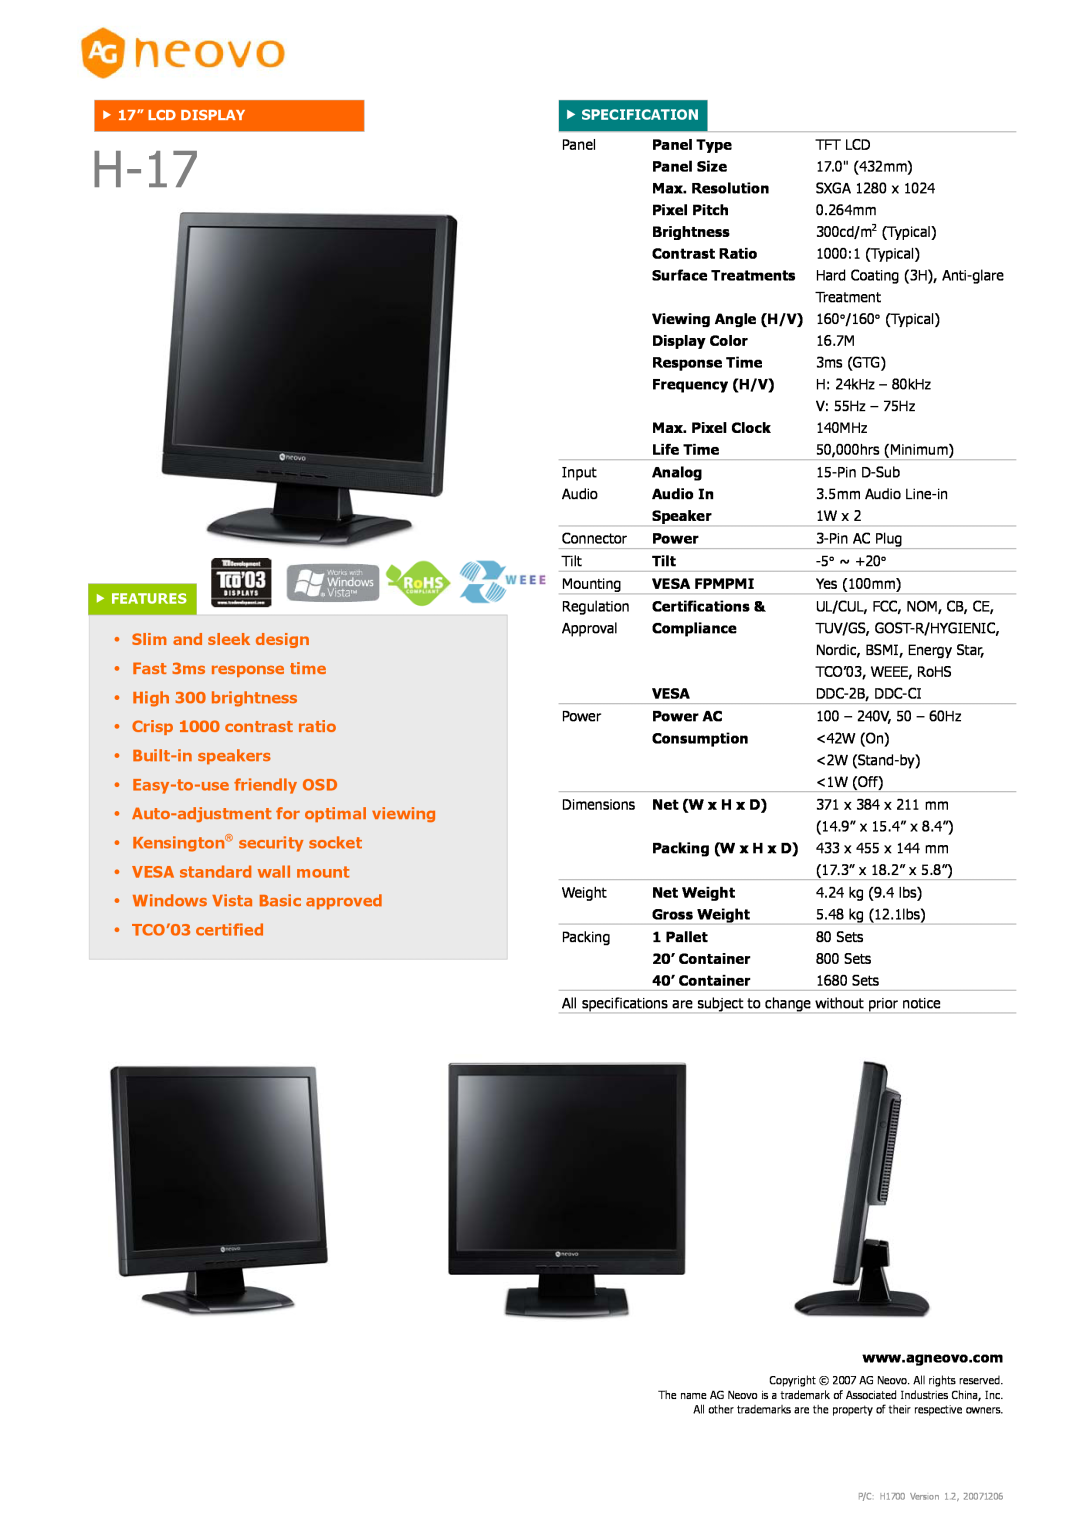 AG Neovo H-17 dimensions Auto-adjustment for optimal viewing Kensington security socket, f 17” LCD DISPLAY, f FEATURES 